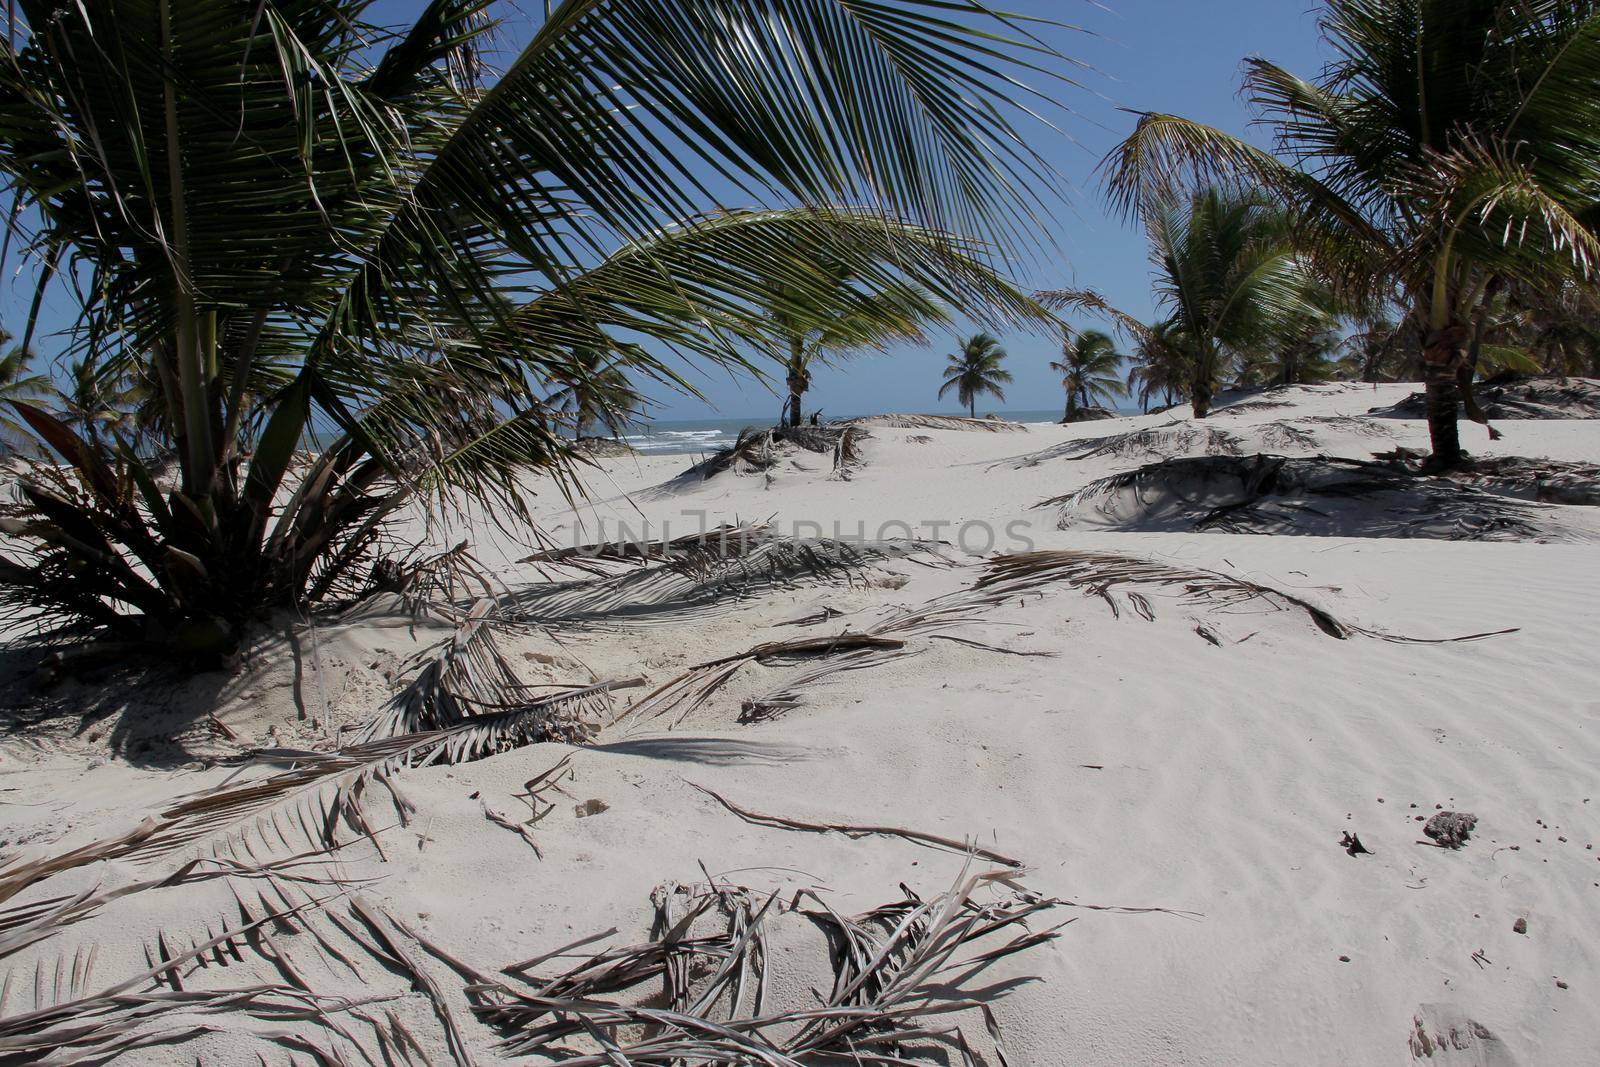 jandaira, bahia / brazil - december 24, 2013: coconut trees are seen by the sand dunes of Mangue-Seco, in the municipality of Jandaira.